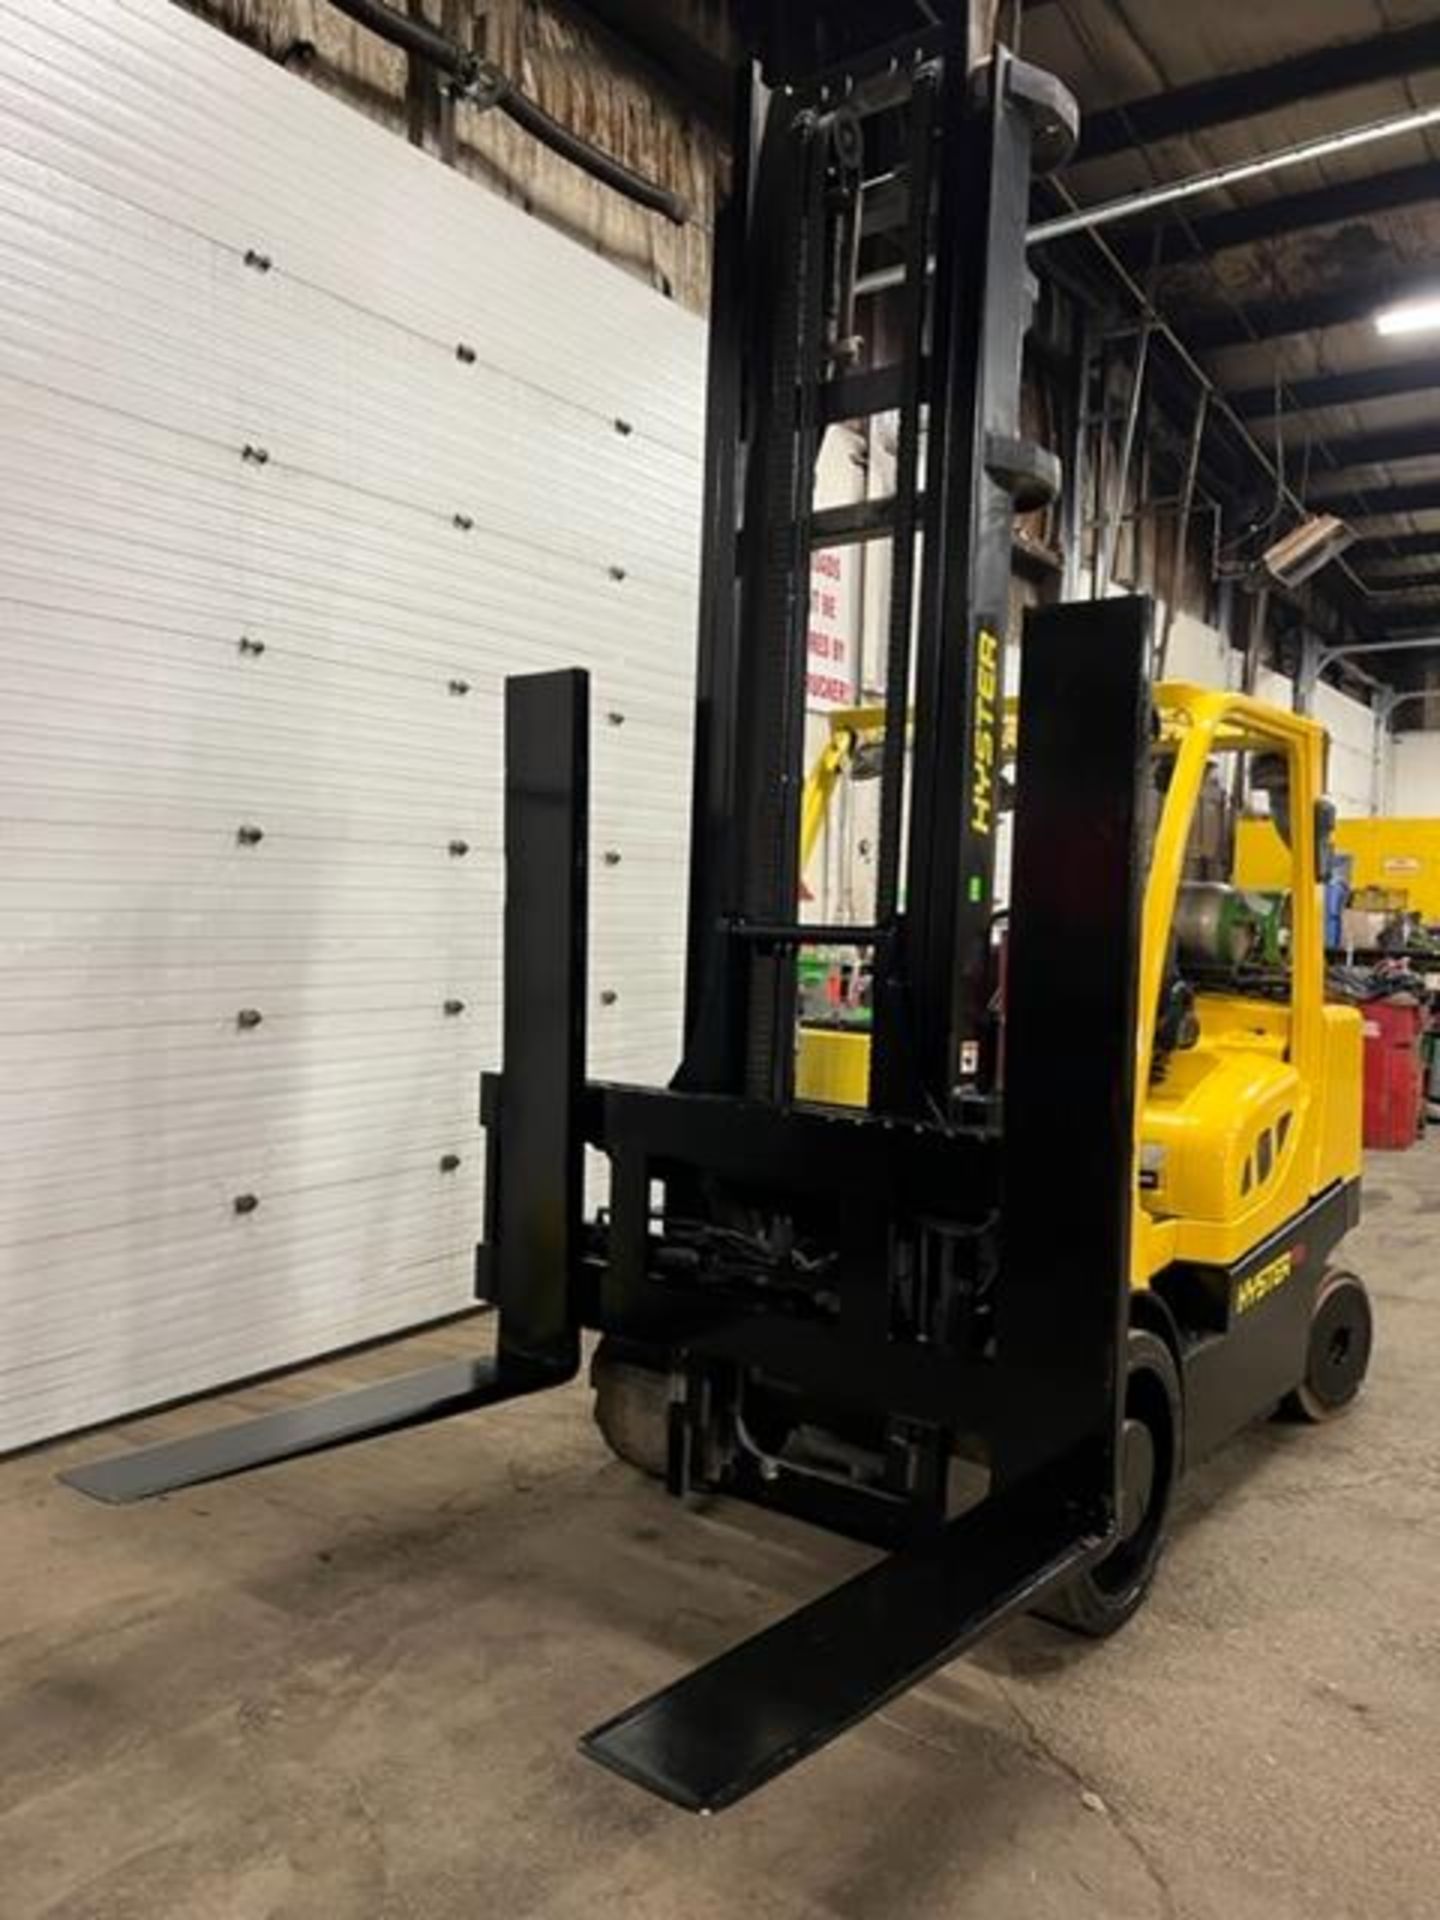 FREE CUSTOMS - 2011 Hyster model 155 15,500lbs Capacity Forklift LPG (propane) with SIDESHIFT (no - Image 2 of 3